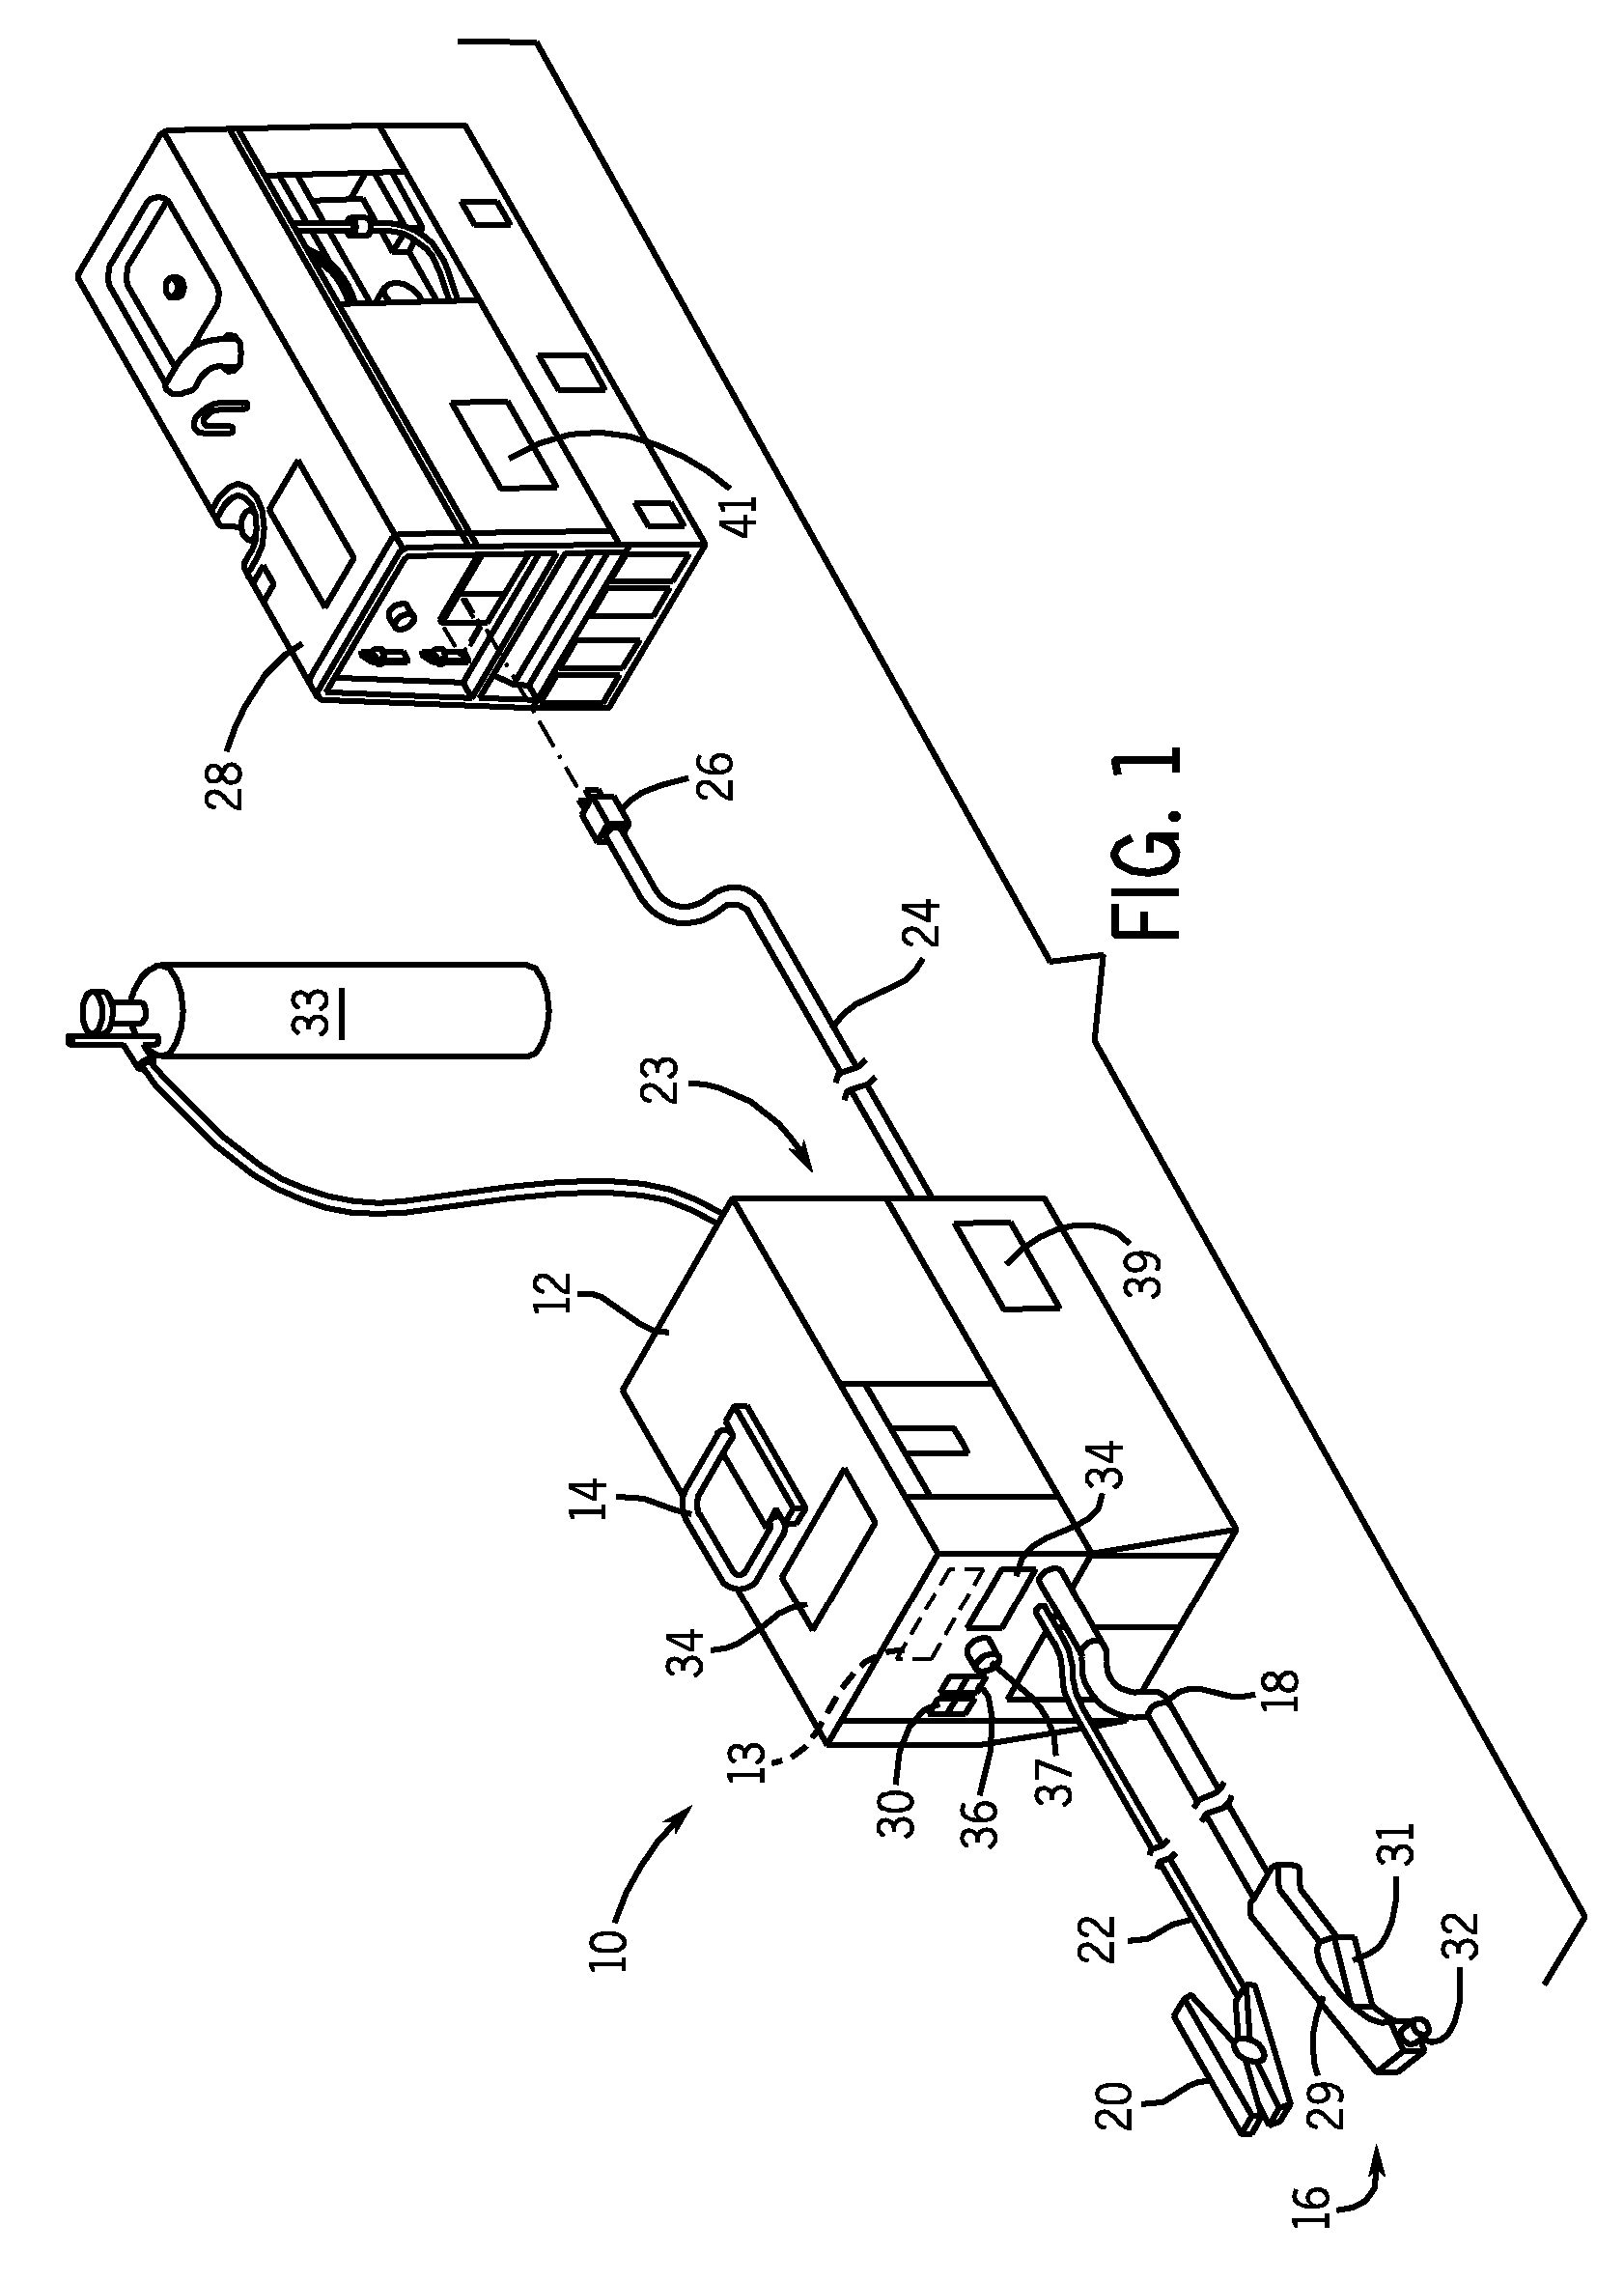 Inverter powered plasma cutting system with fixed gas flow control